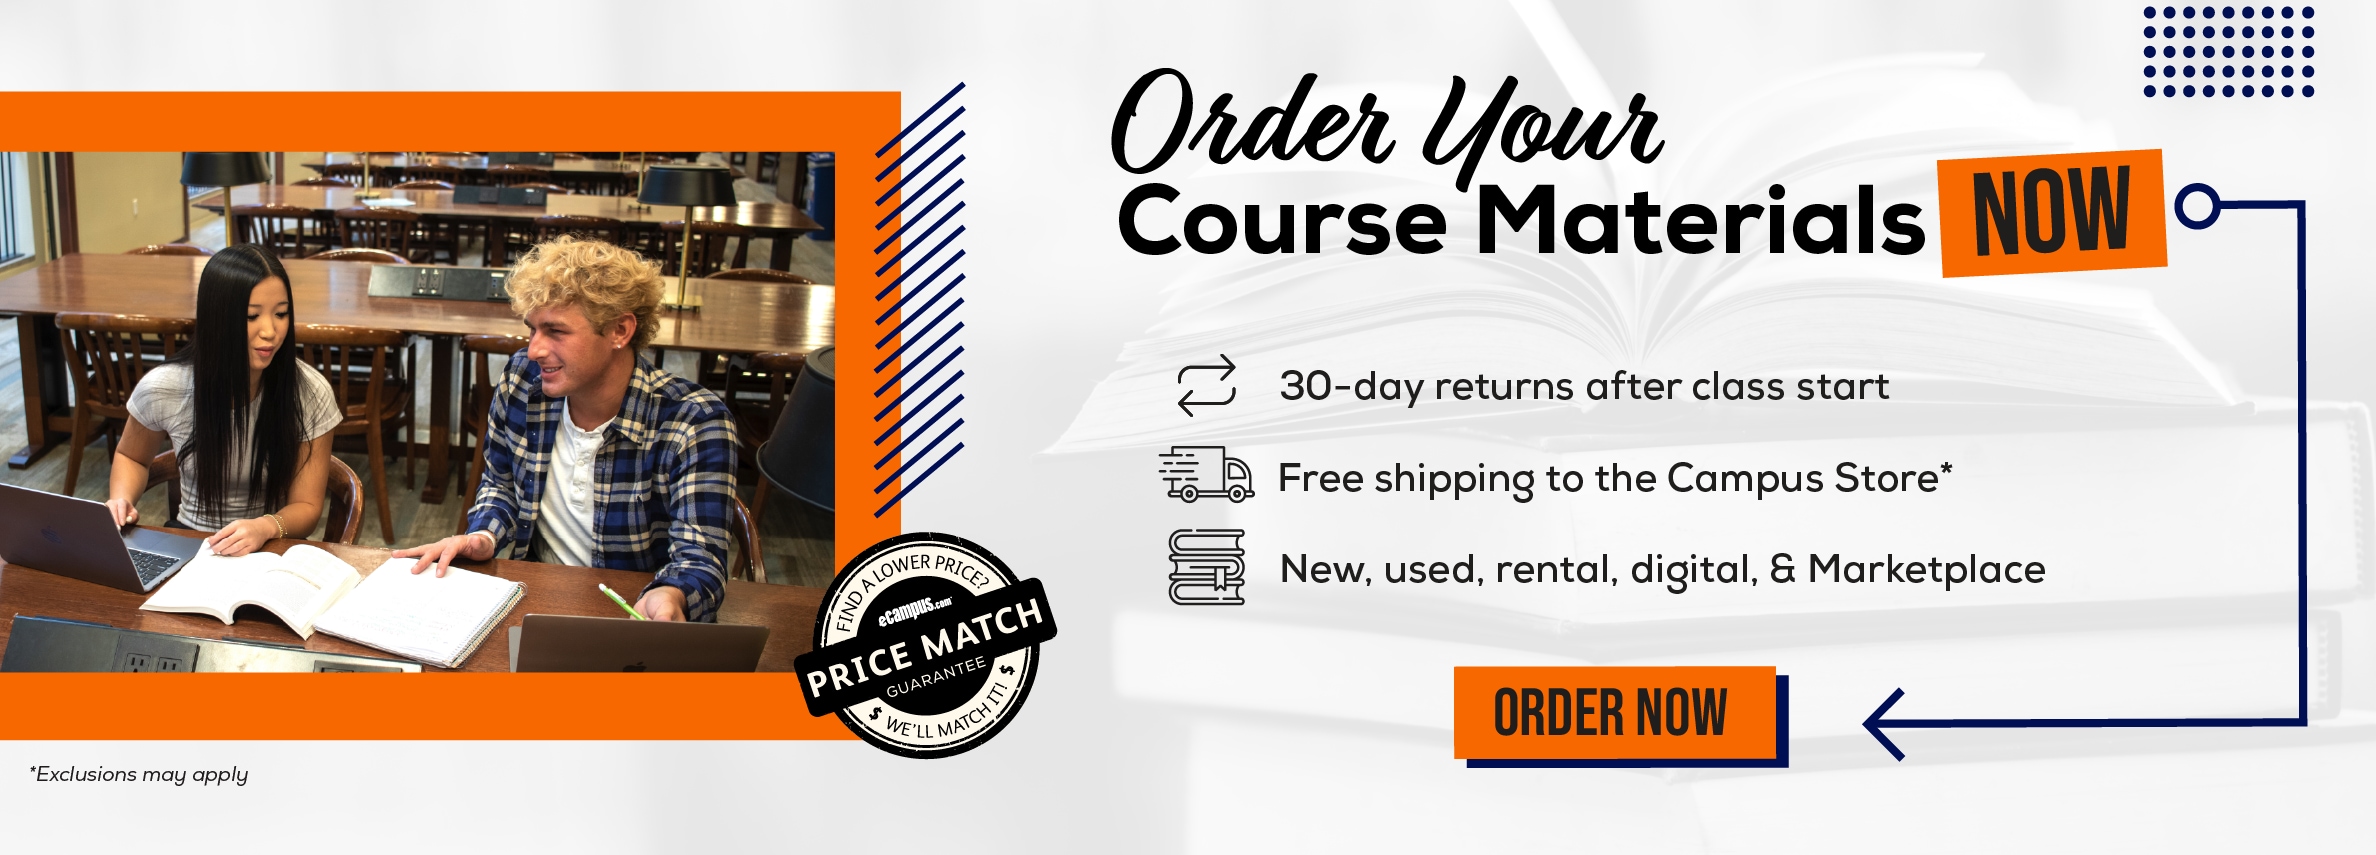 Order Your Course Materials Now. 30-day returns after class start. Free shipping to Campus Store*. New, used, rental, digital, & Marketplace. Order now. *Exclusions may apply.